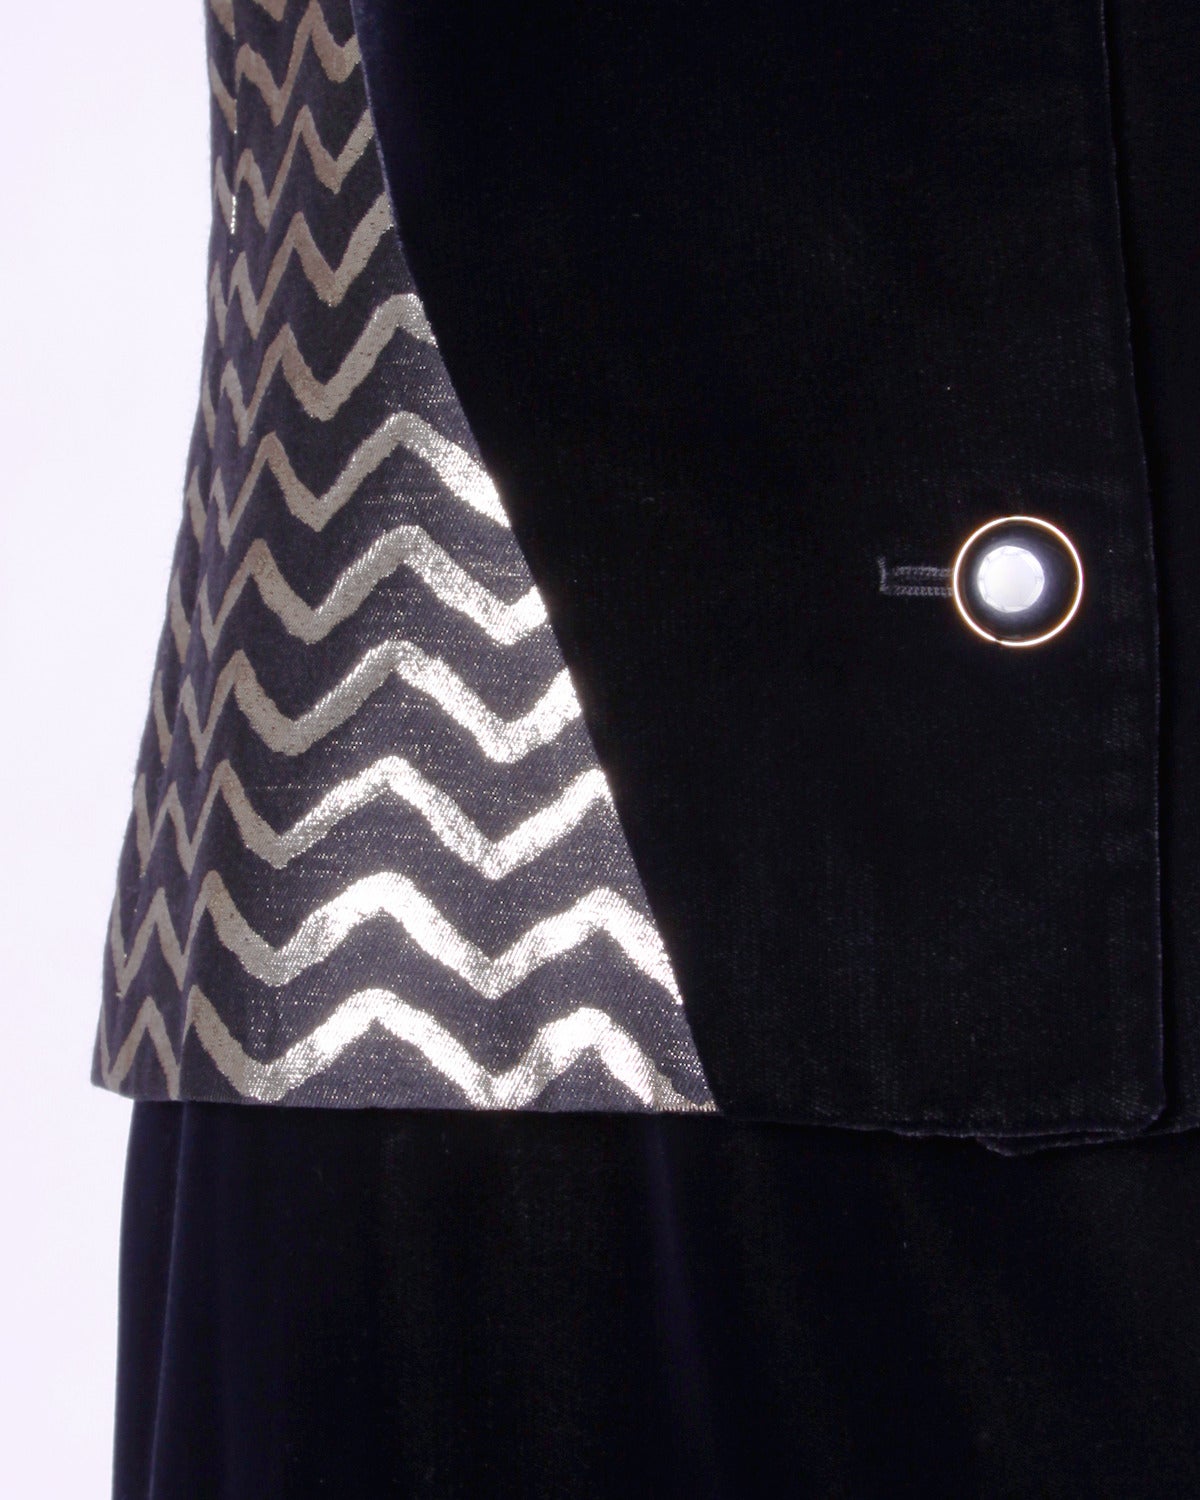 Elegant vintage suit by Givenchy featuring black silk velvet and metallic gold and black chevron patterned fabric blocking. Wear the skirt and jacket together or separately!

Details:

Fully Lined
Front Button Closure On Top/ Side Zip and Hook